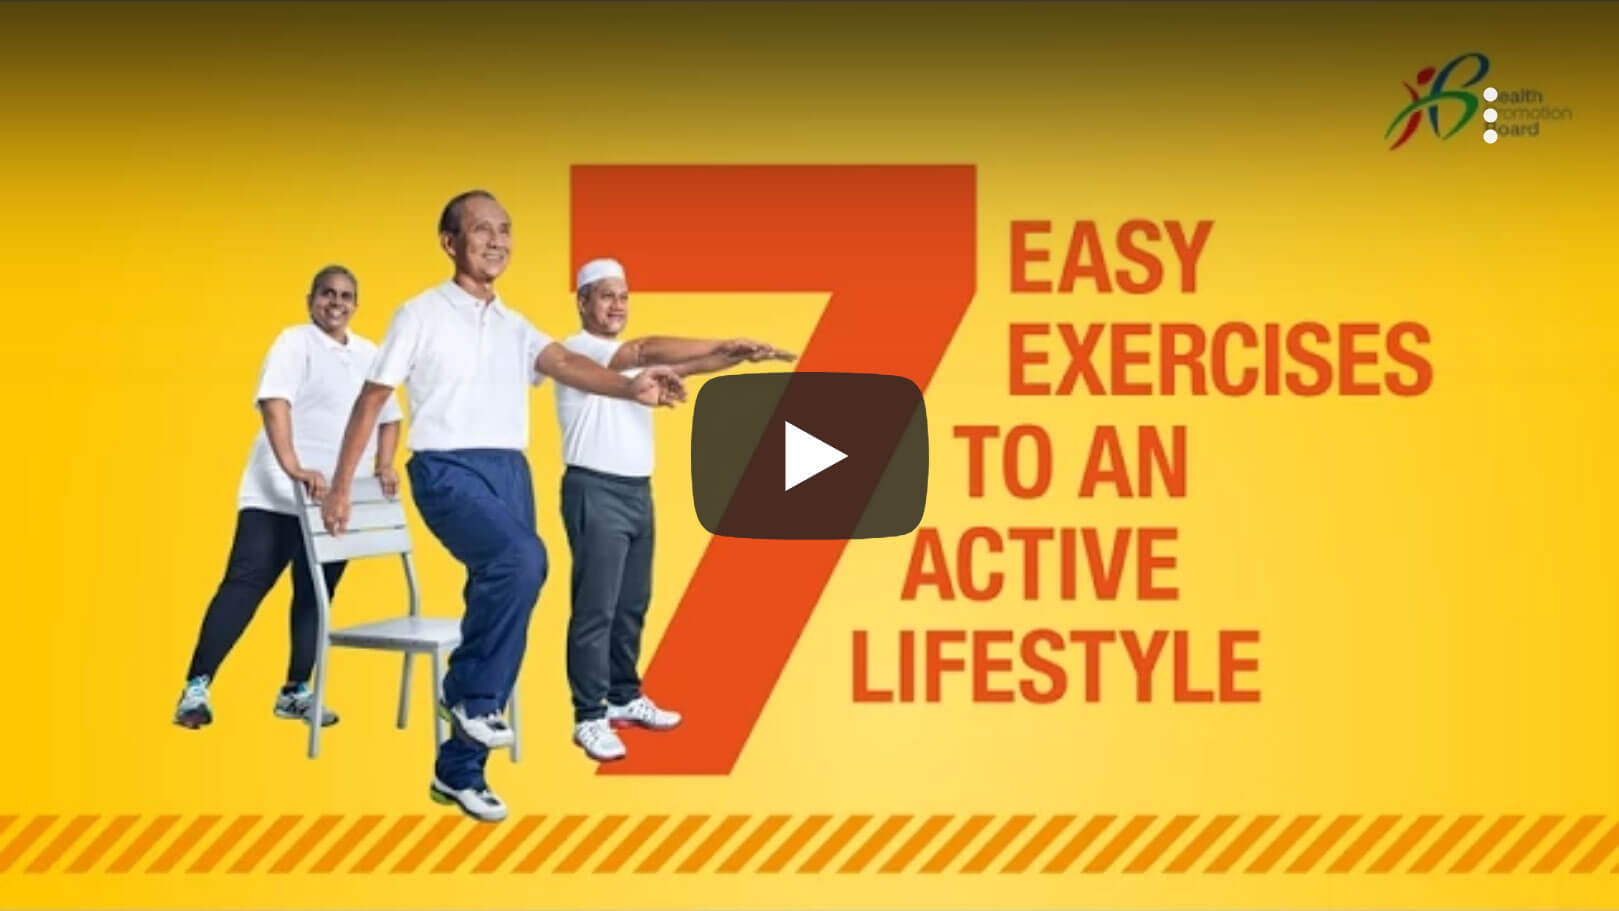 7 Easy Exercises to an Active Lifestyle (Full Version)